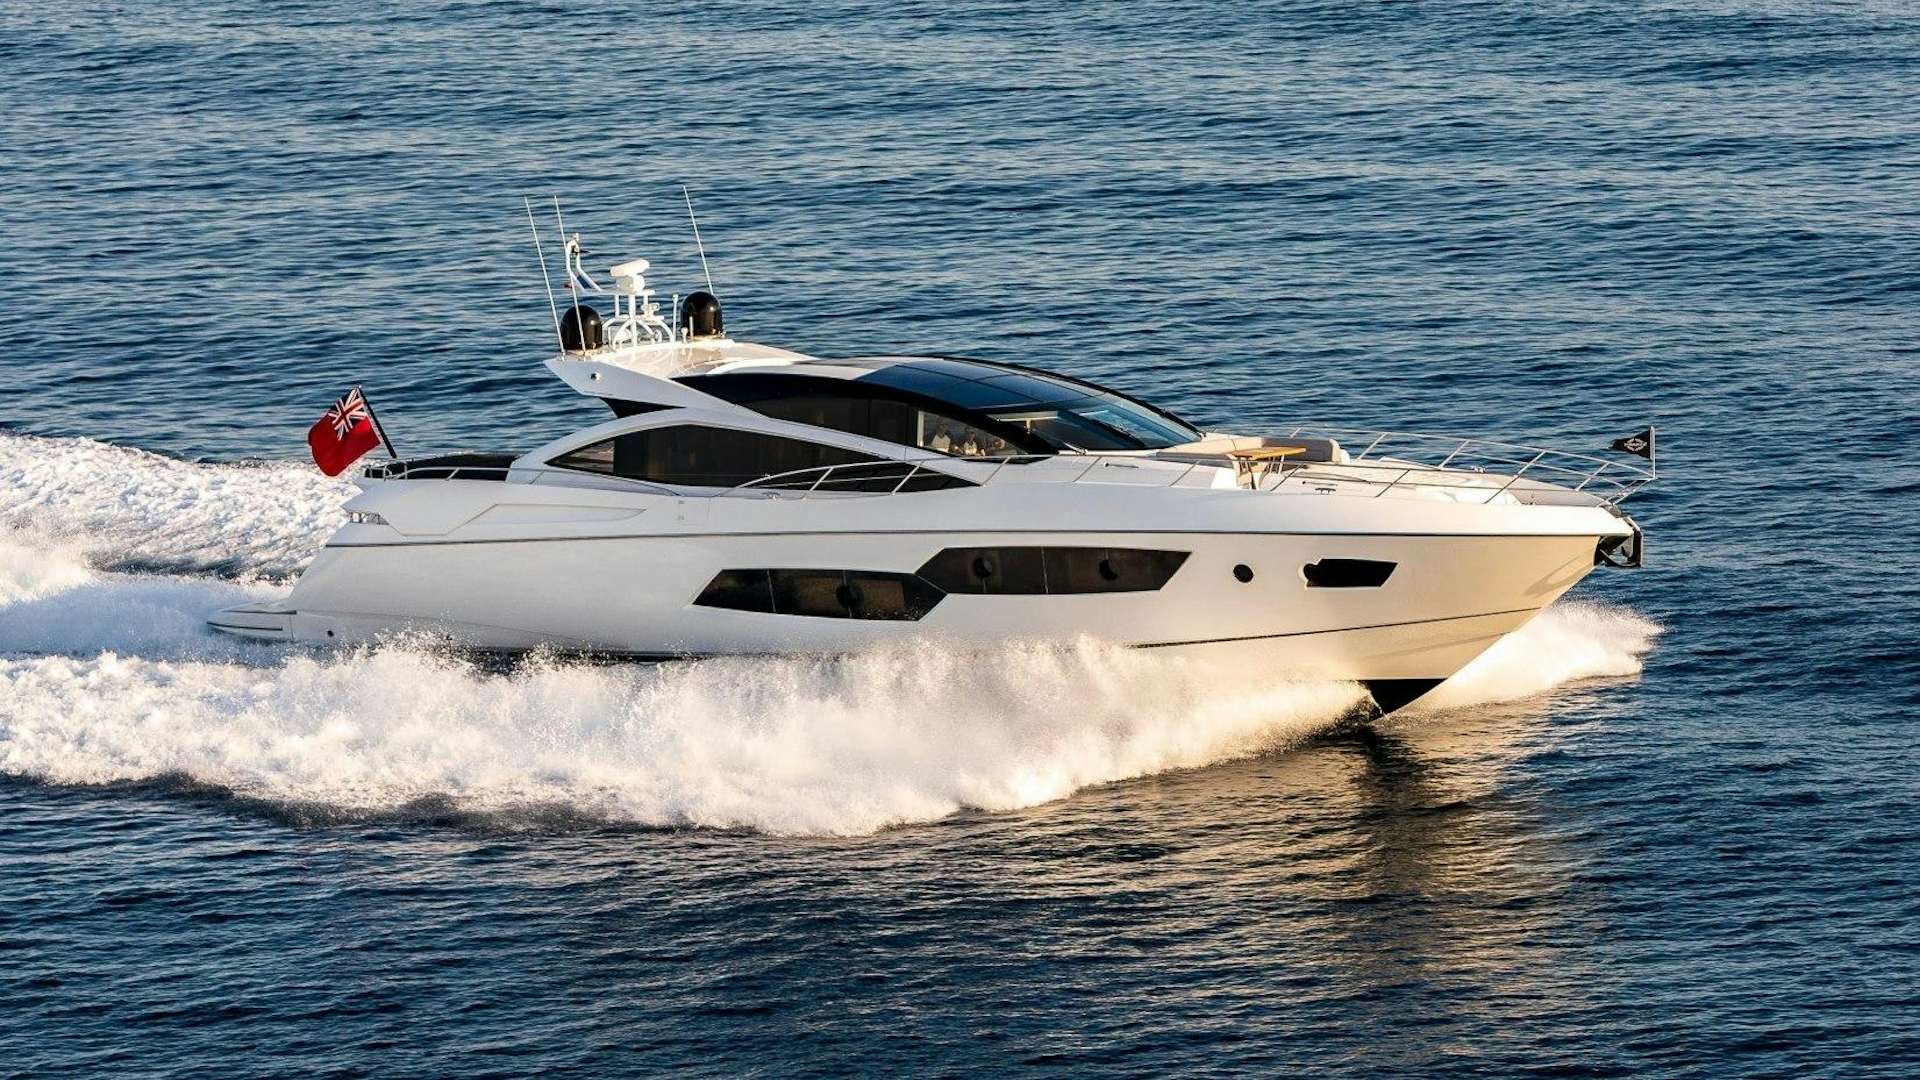 Watch Video for SKYFALL Yacht for Sale